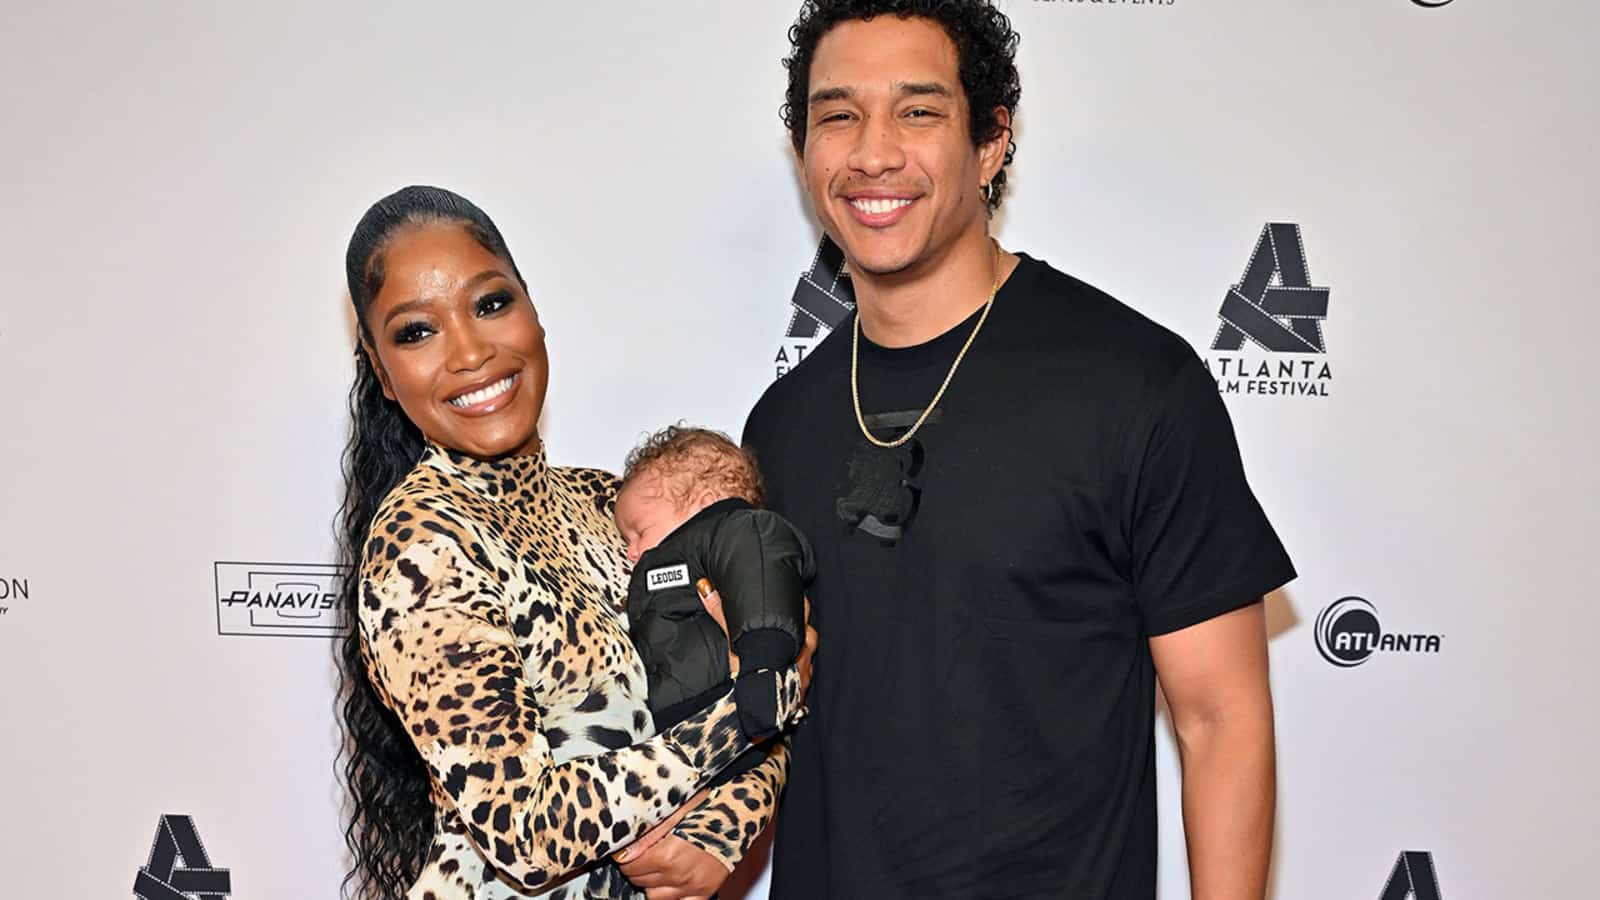 Darius and Keke at a red carpet event with their new born baby.